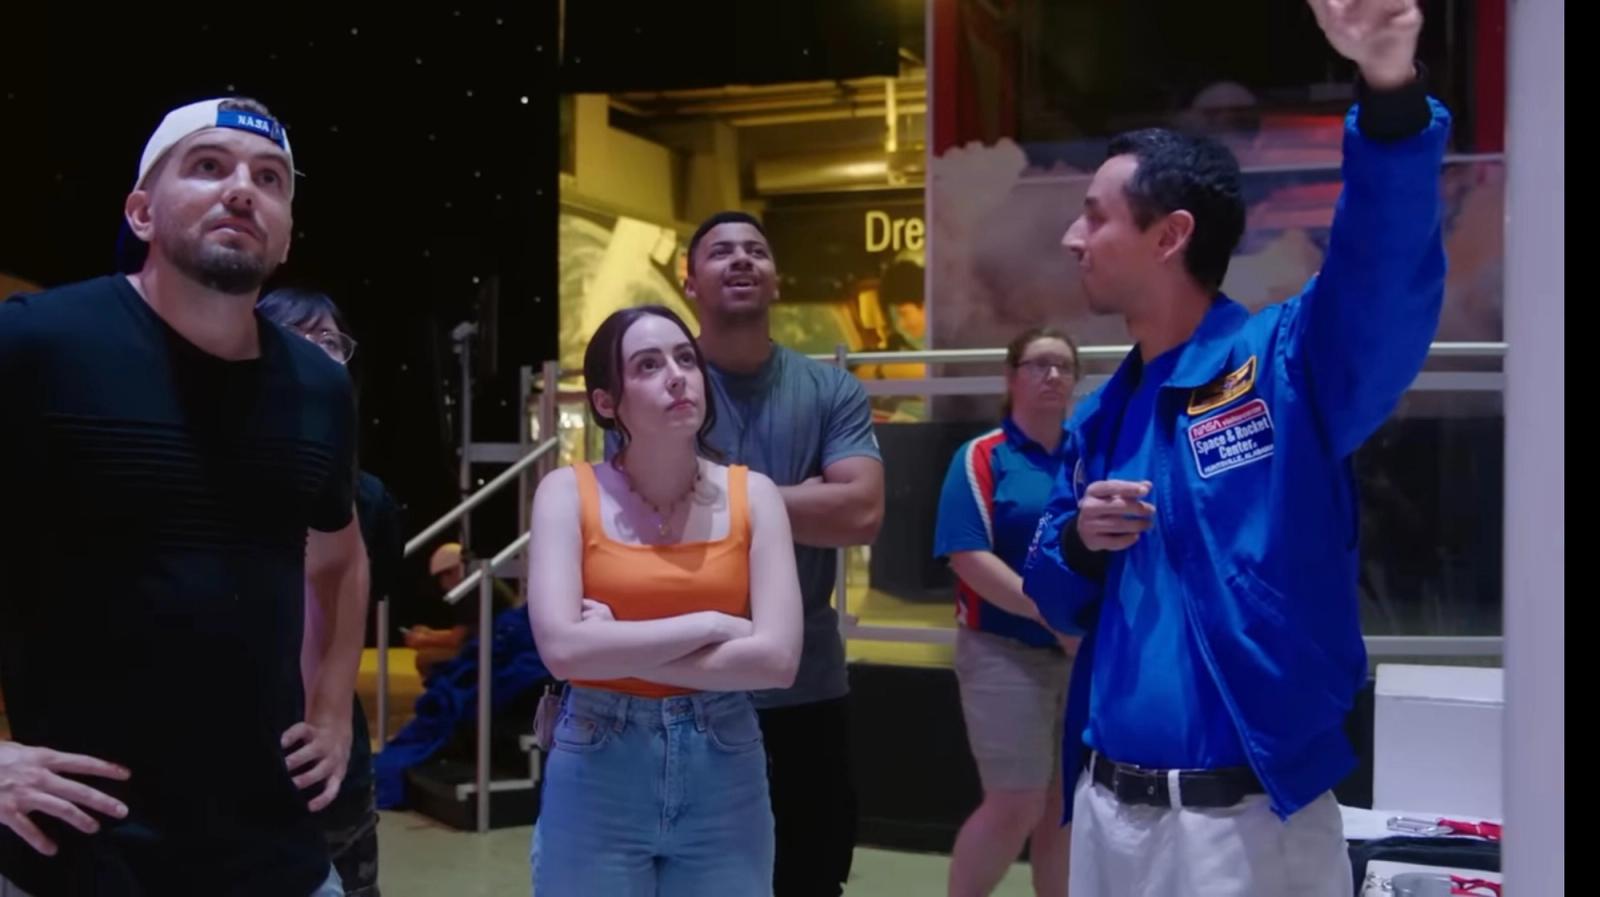 A guided tour of space camp